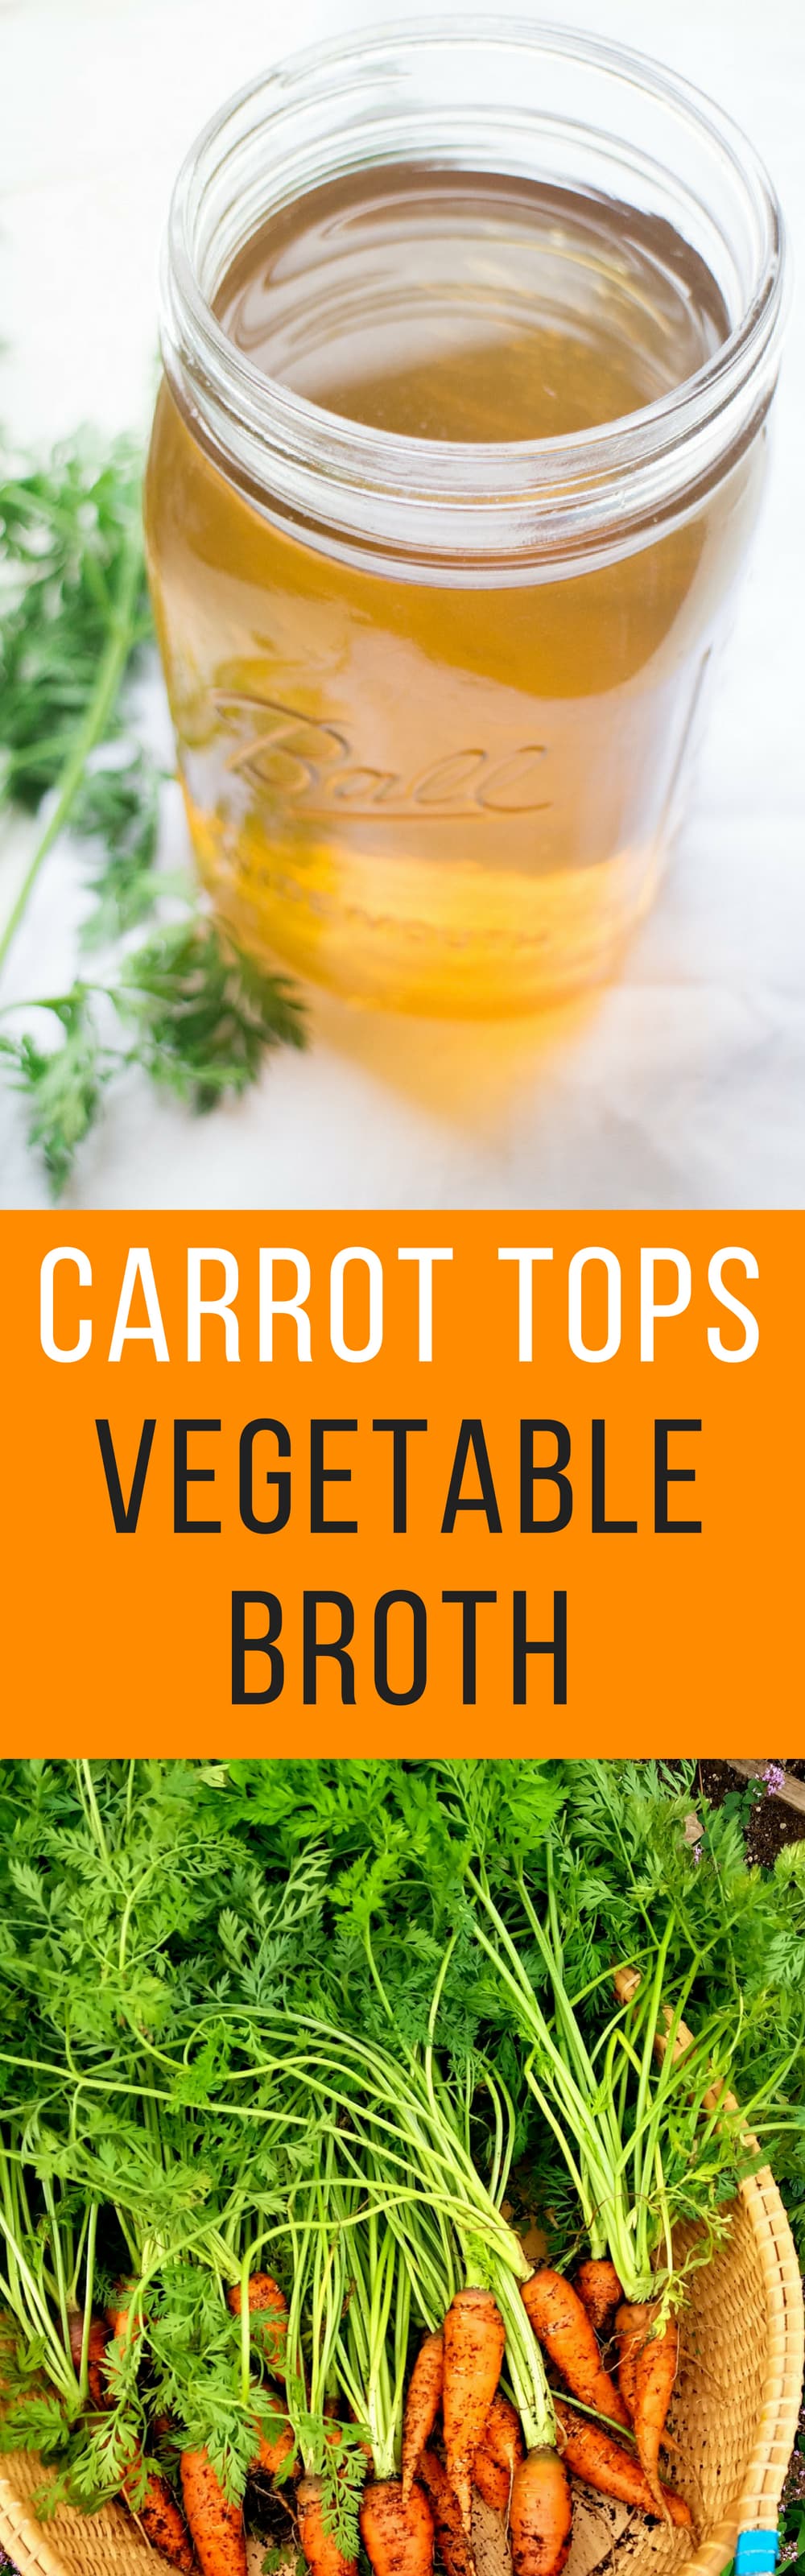 VEGETABLE BROTH made with carrot tops!  This easy homemade recipe uses carrot greens to make a healthy vegetarian broth! Carrot greens provide amazing health benefits so they're great to cook with!  